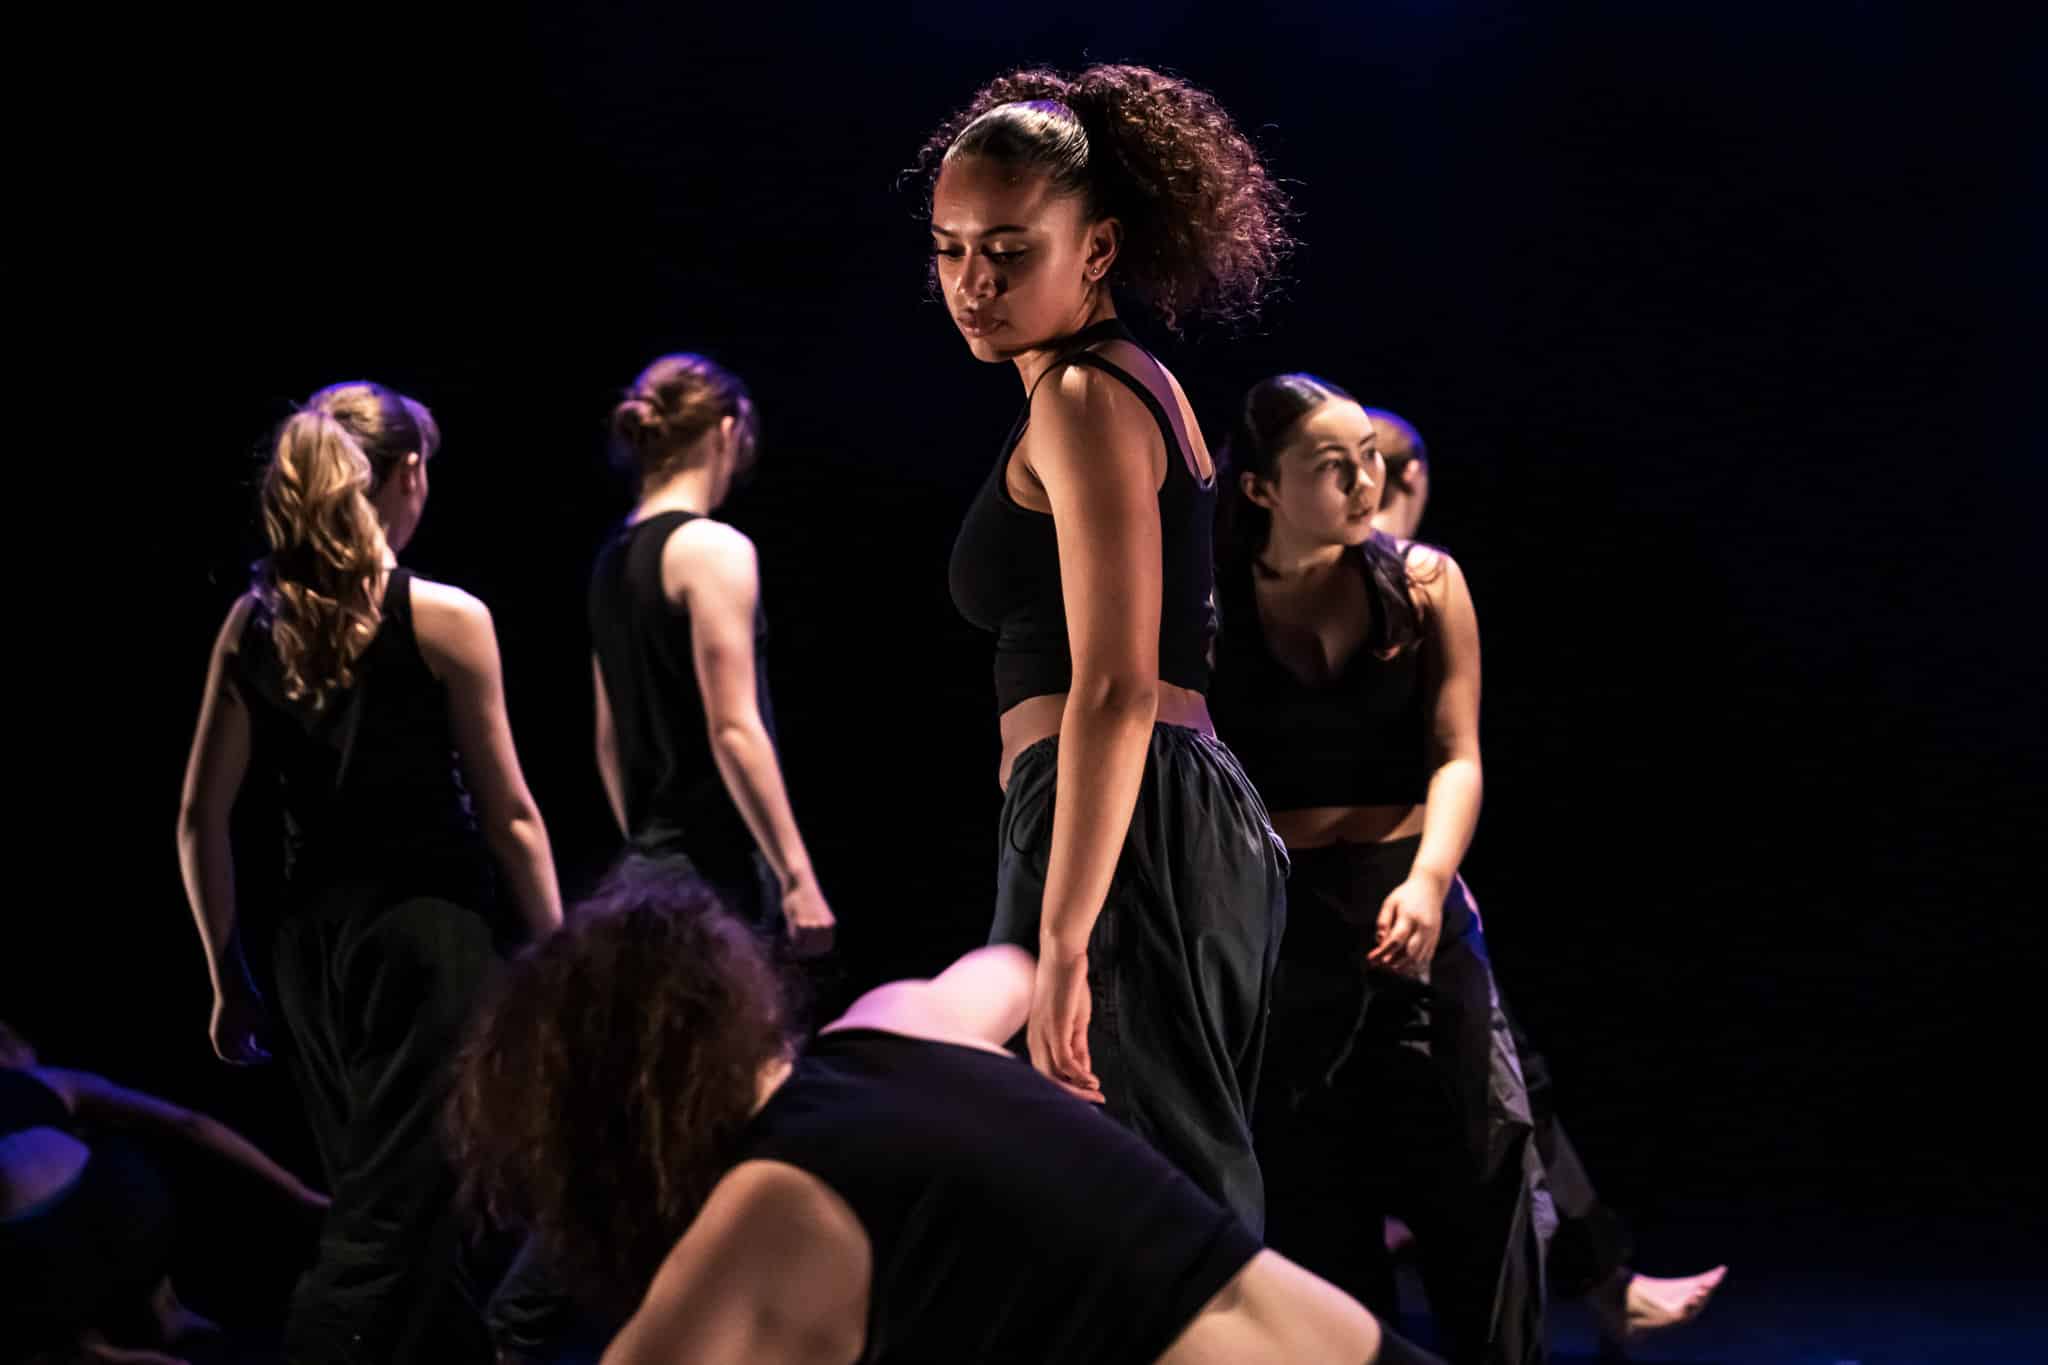 Six young dancers perform a pensive piece in a dim lit background.